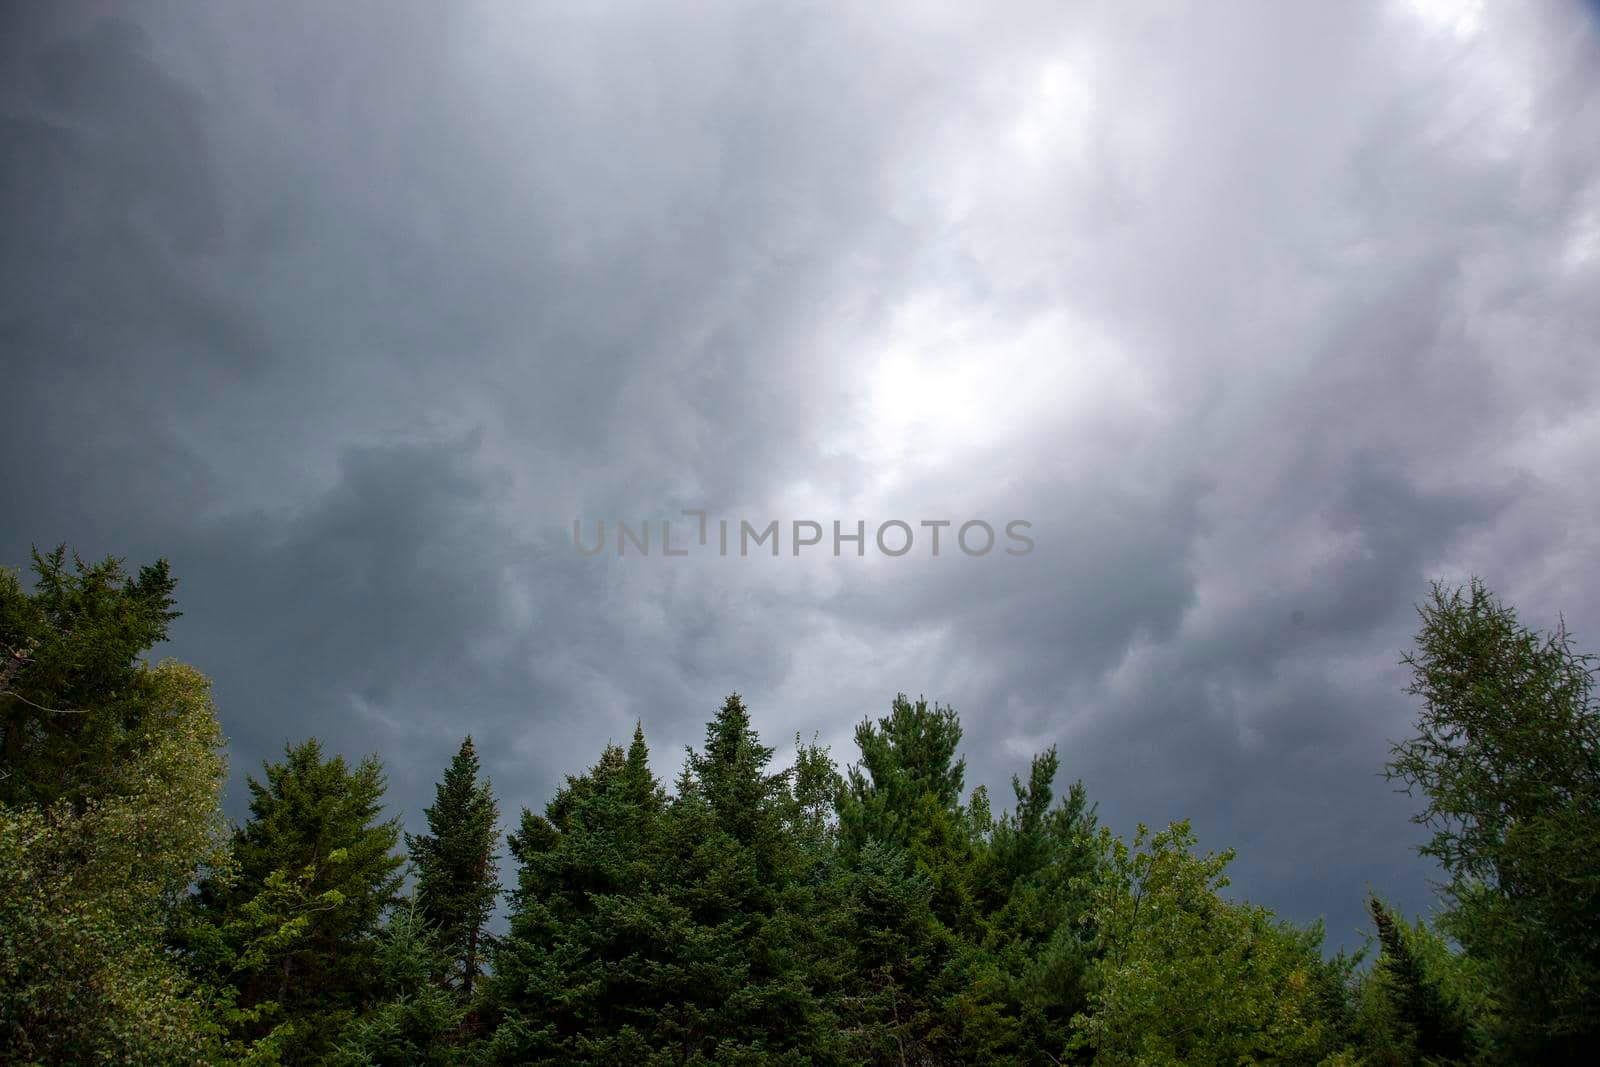 dark ominous storm clouds above trees by rustycanuck